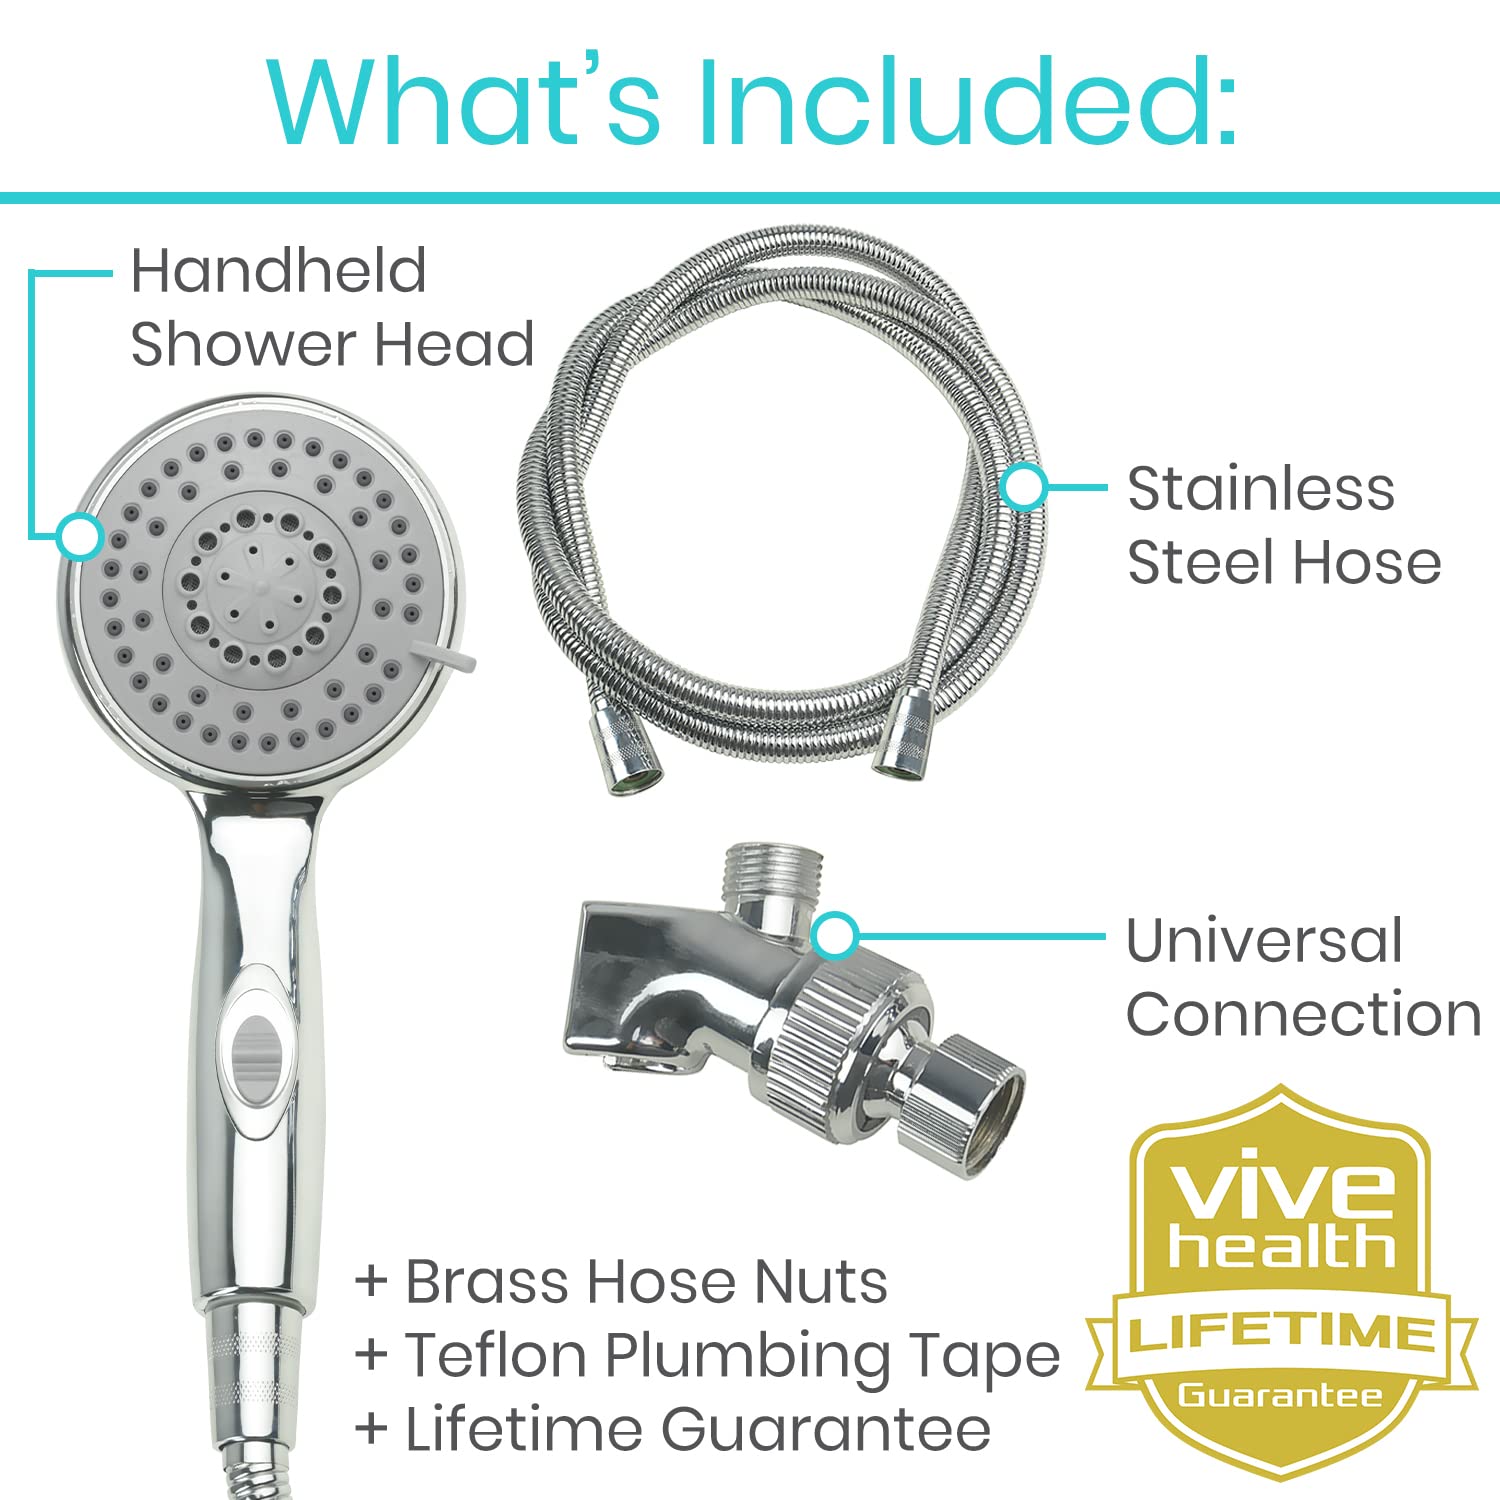 Vive Hand Held Shower Head with Long Hose - Detachable 2 in 1 Universal High Pressure Handheld Adapter - Chrome Finish with Large Waterfall Rainfall & Holder for Wall - Clean Overhead Rain Style